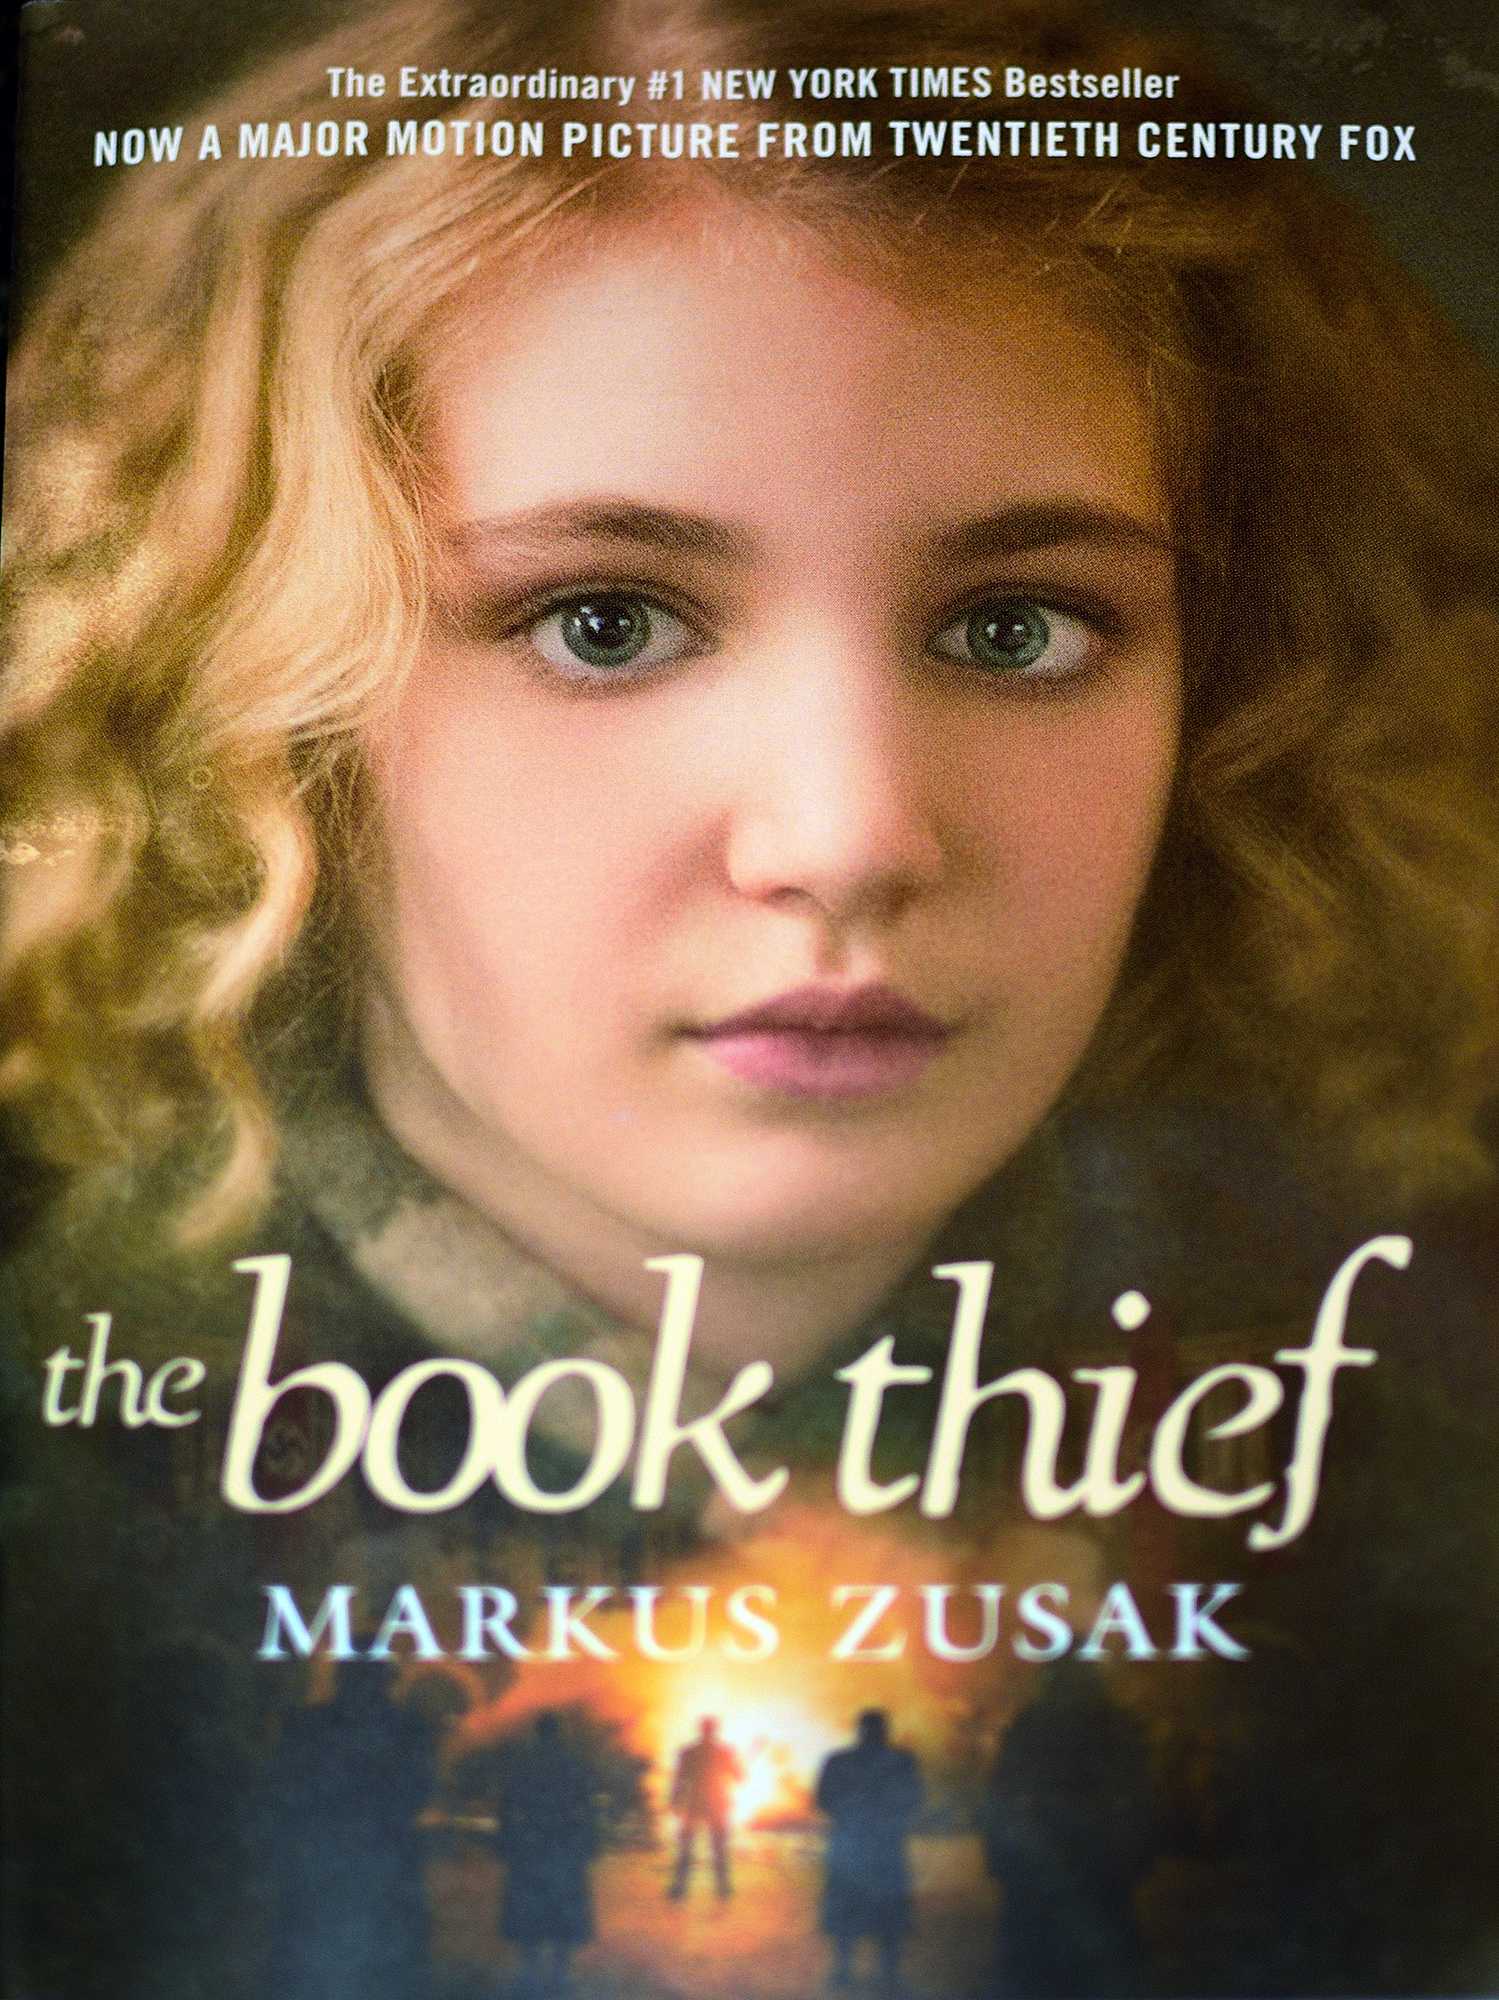 review for the book thief